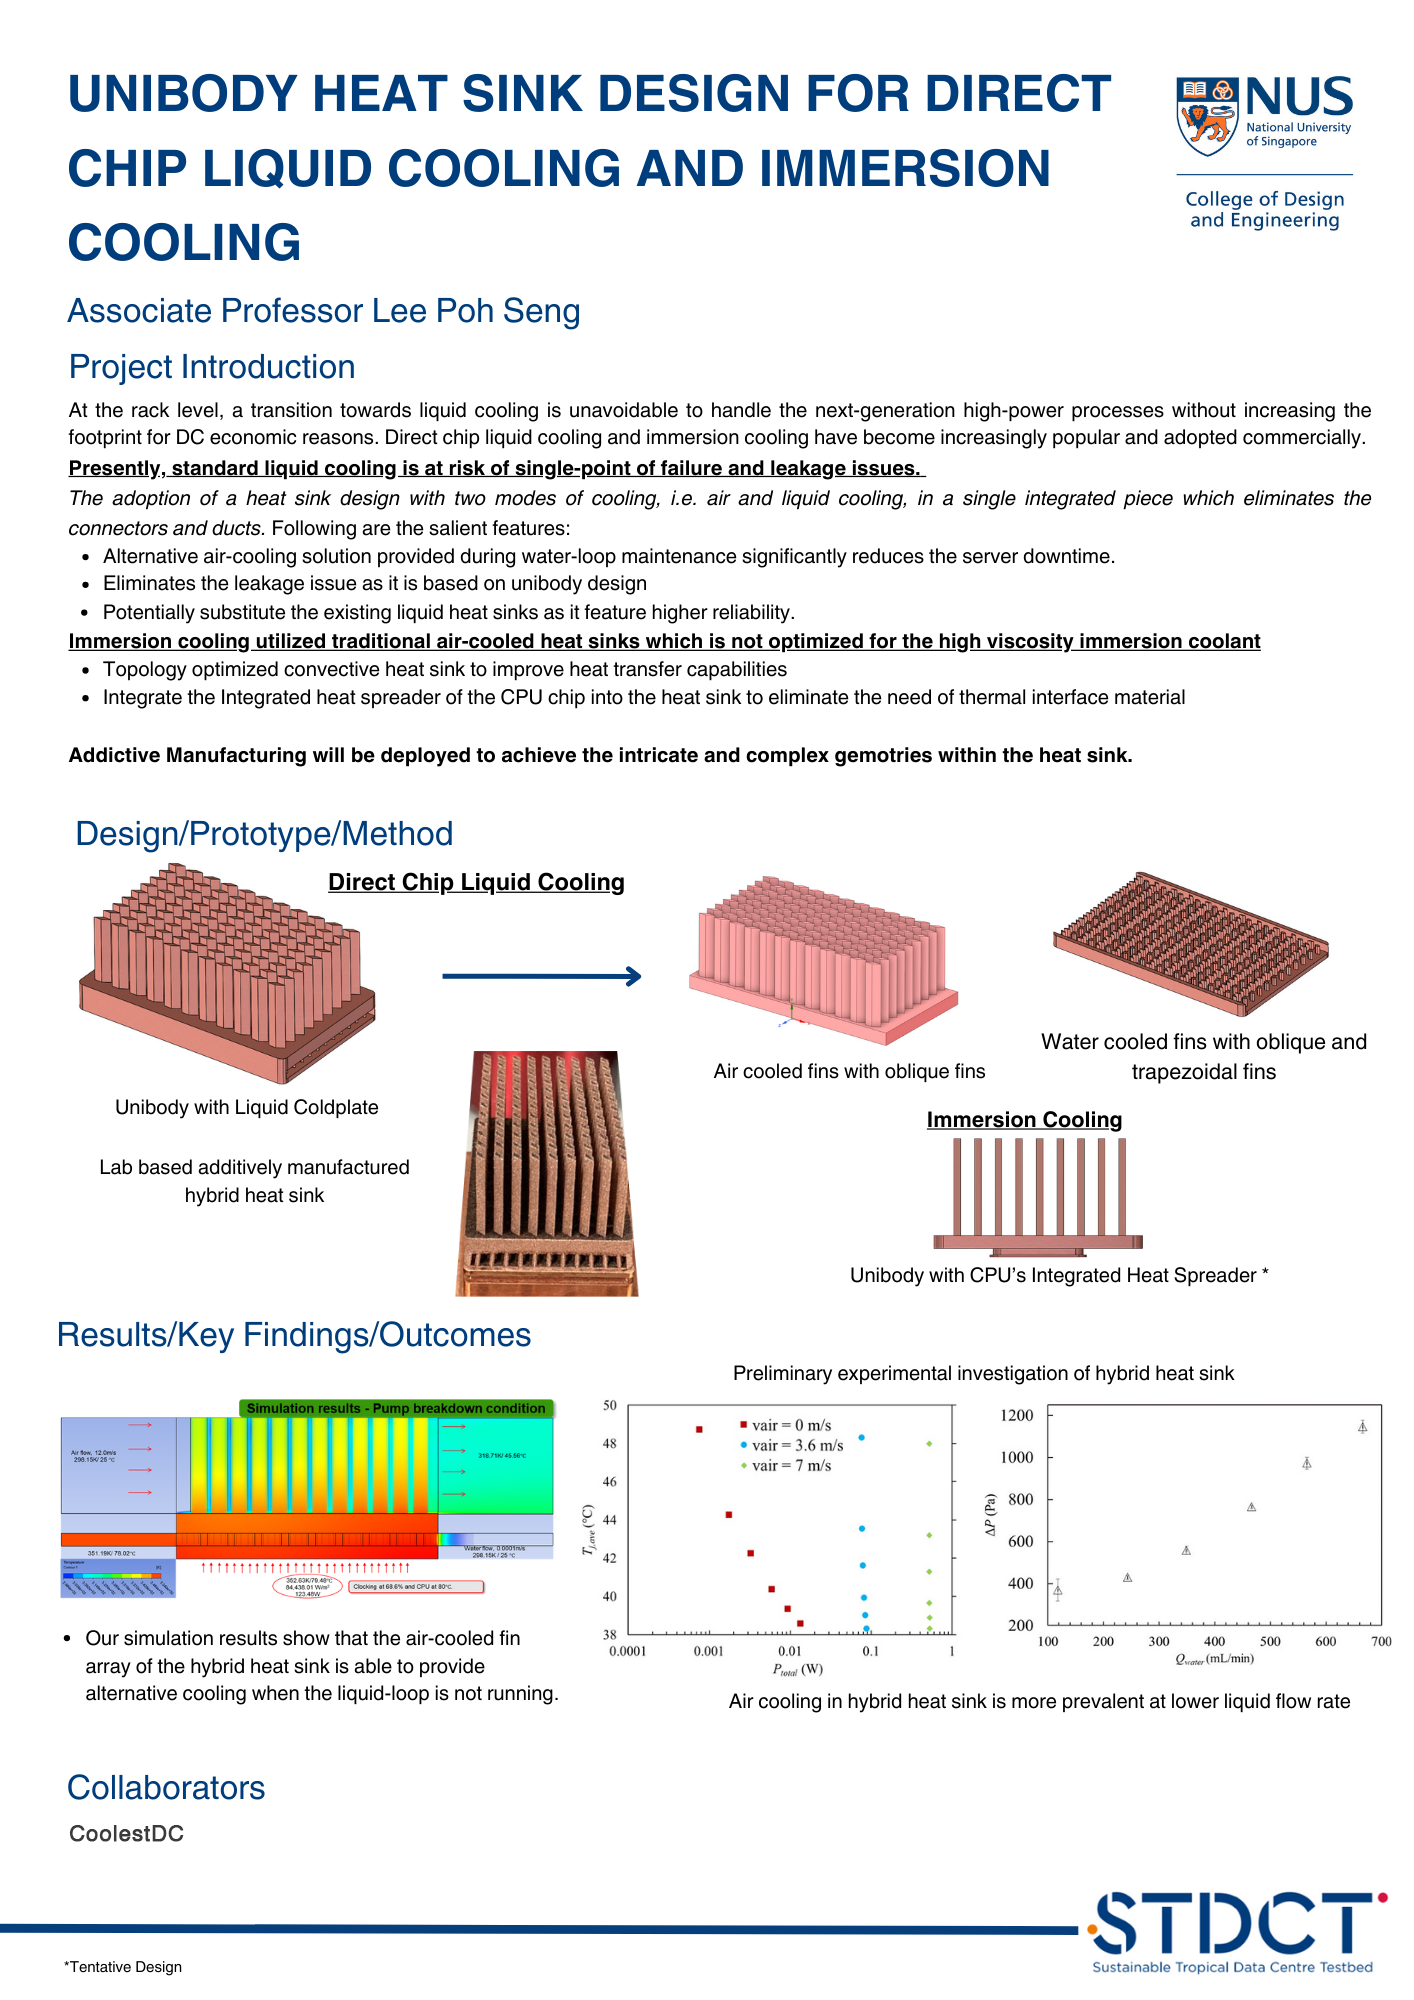 Unibody Heat Sink Design for Direct Chip Liquid Cooling and Immersion Cooling